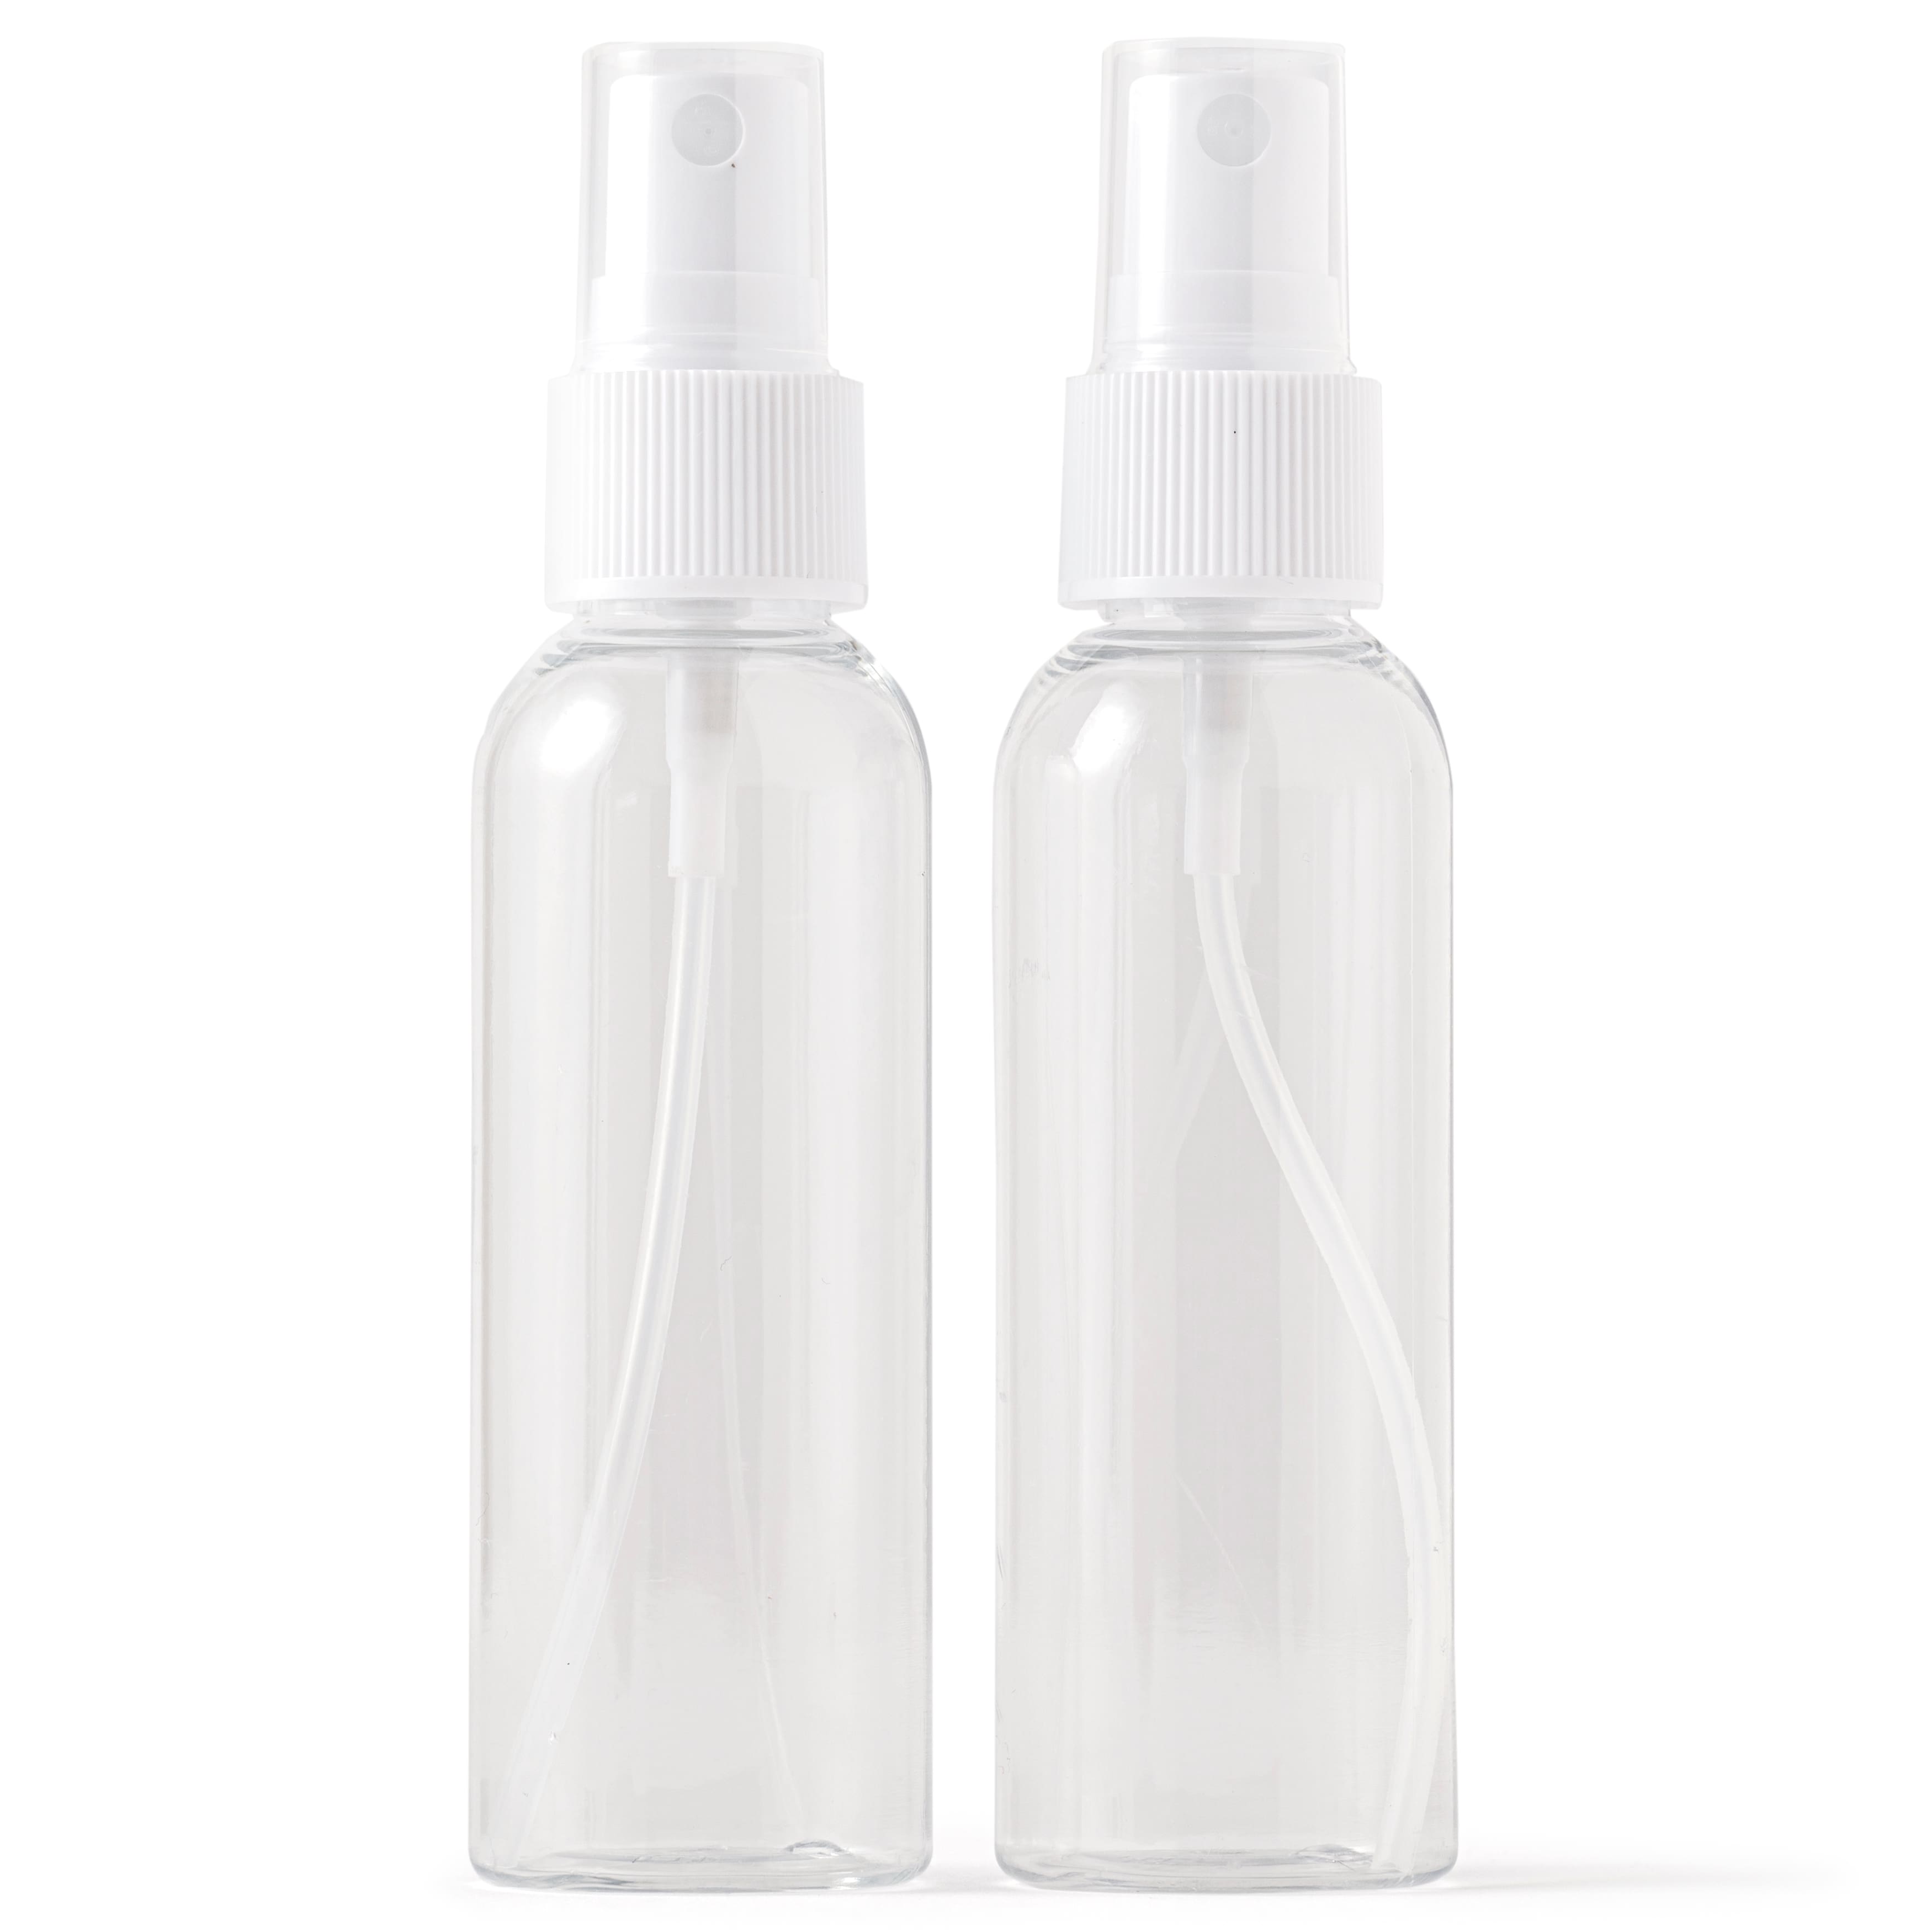 Recollections Spray Bottles - 2 ct